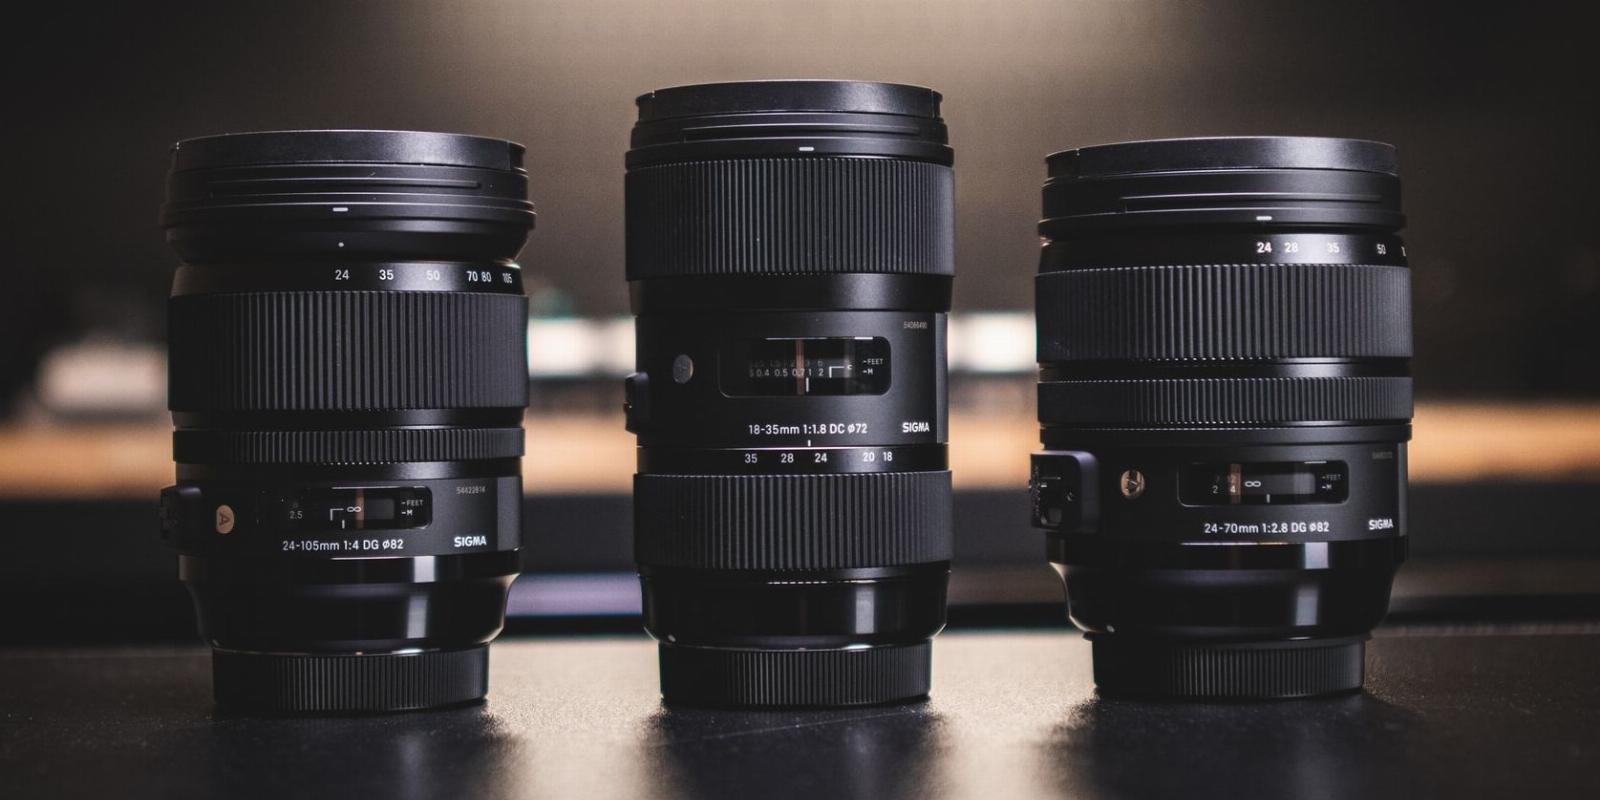 Why You Should Buy Cheap Camera Lenses Over Expensive Ones